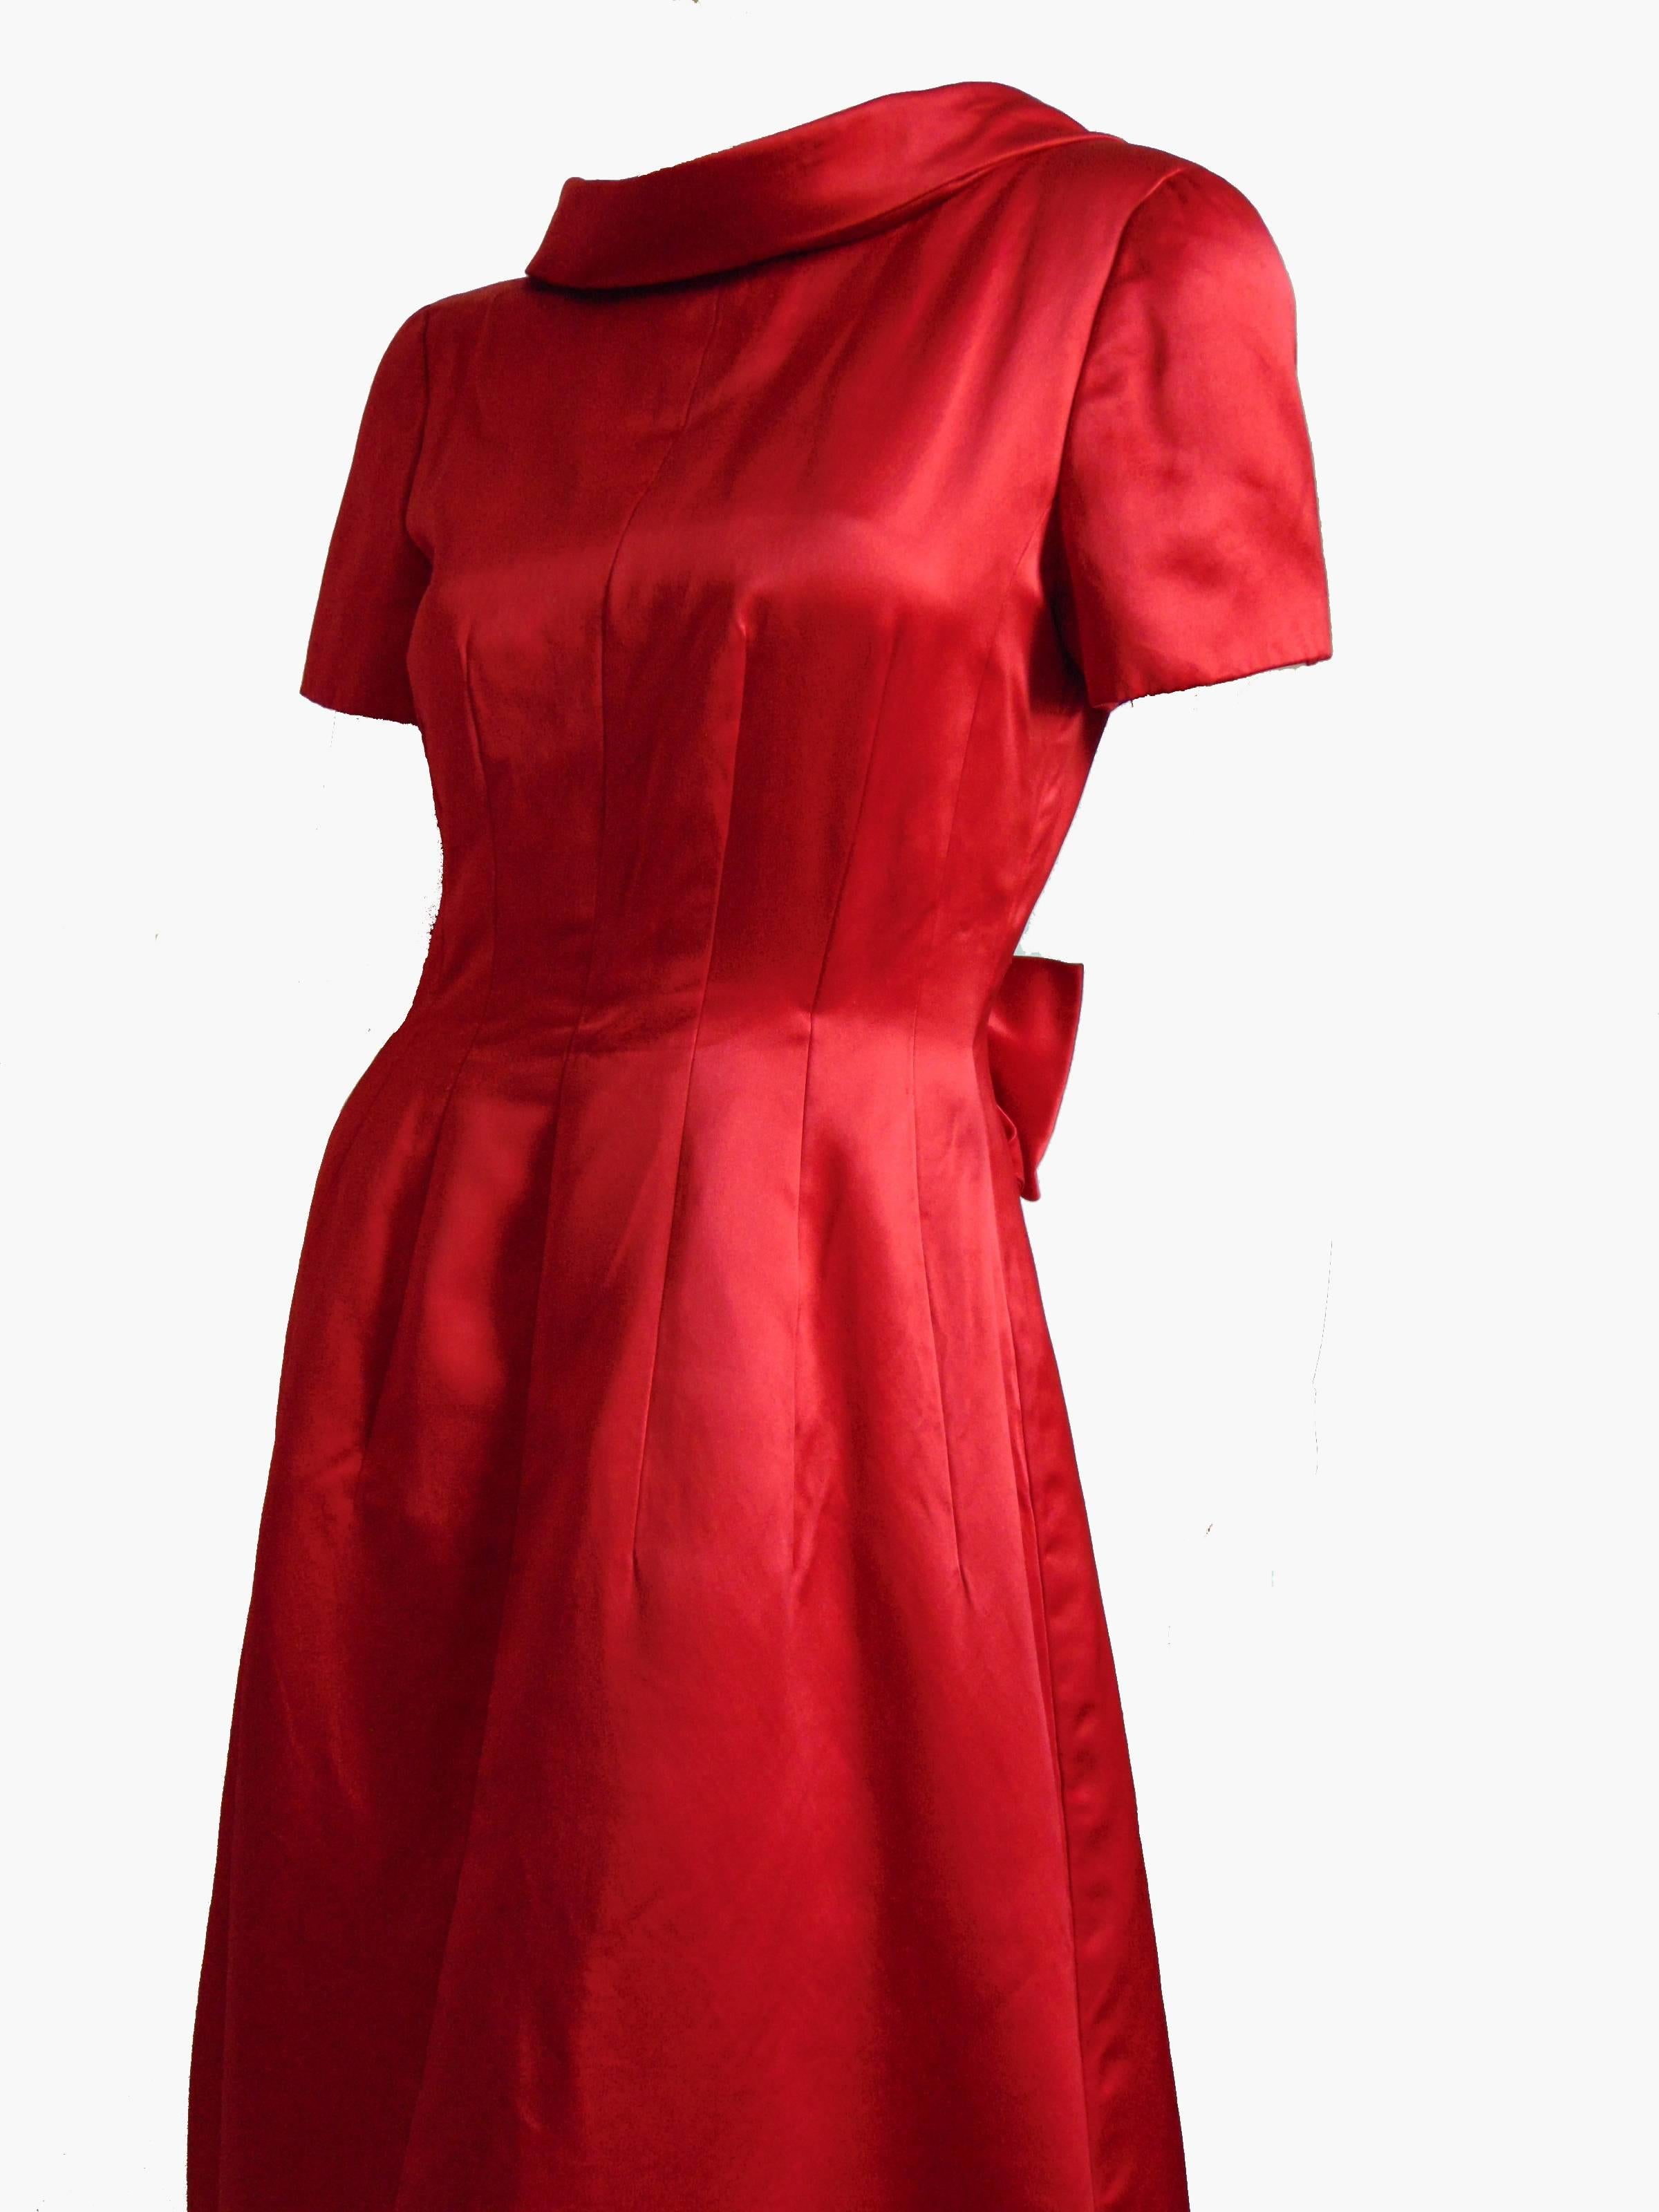 Brilliant Valentino Red Silk Evening Gown with Low Cut Back + Bow Size 10 1990s  2